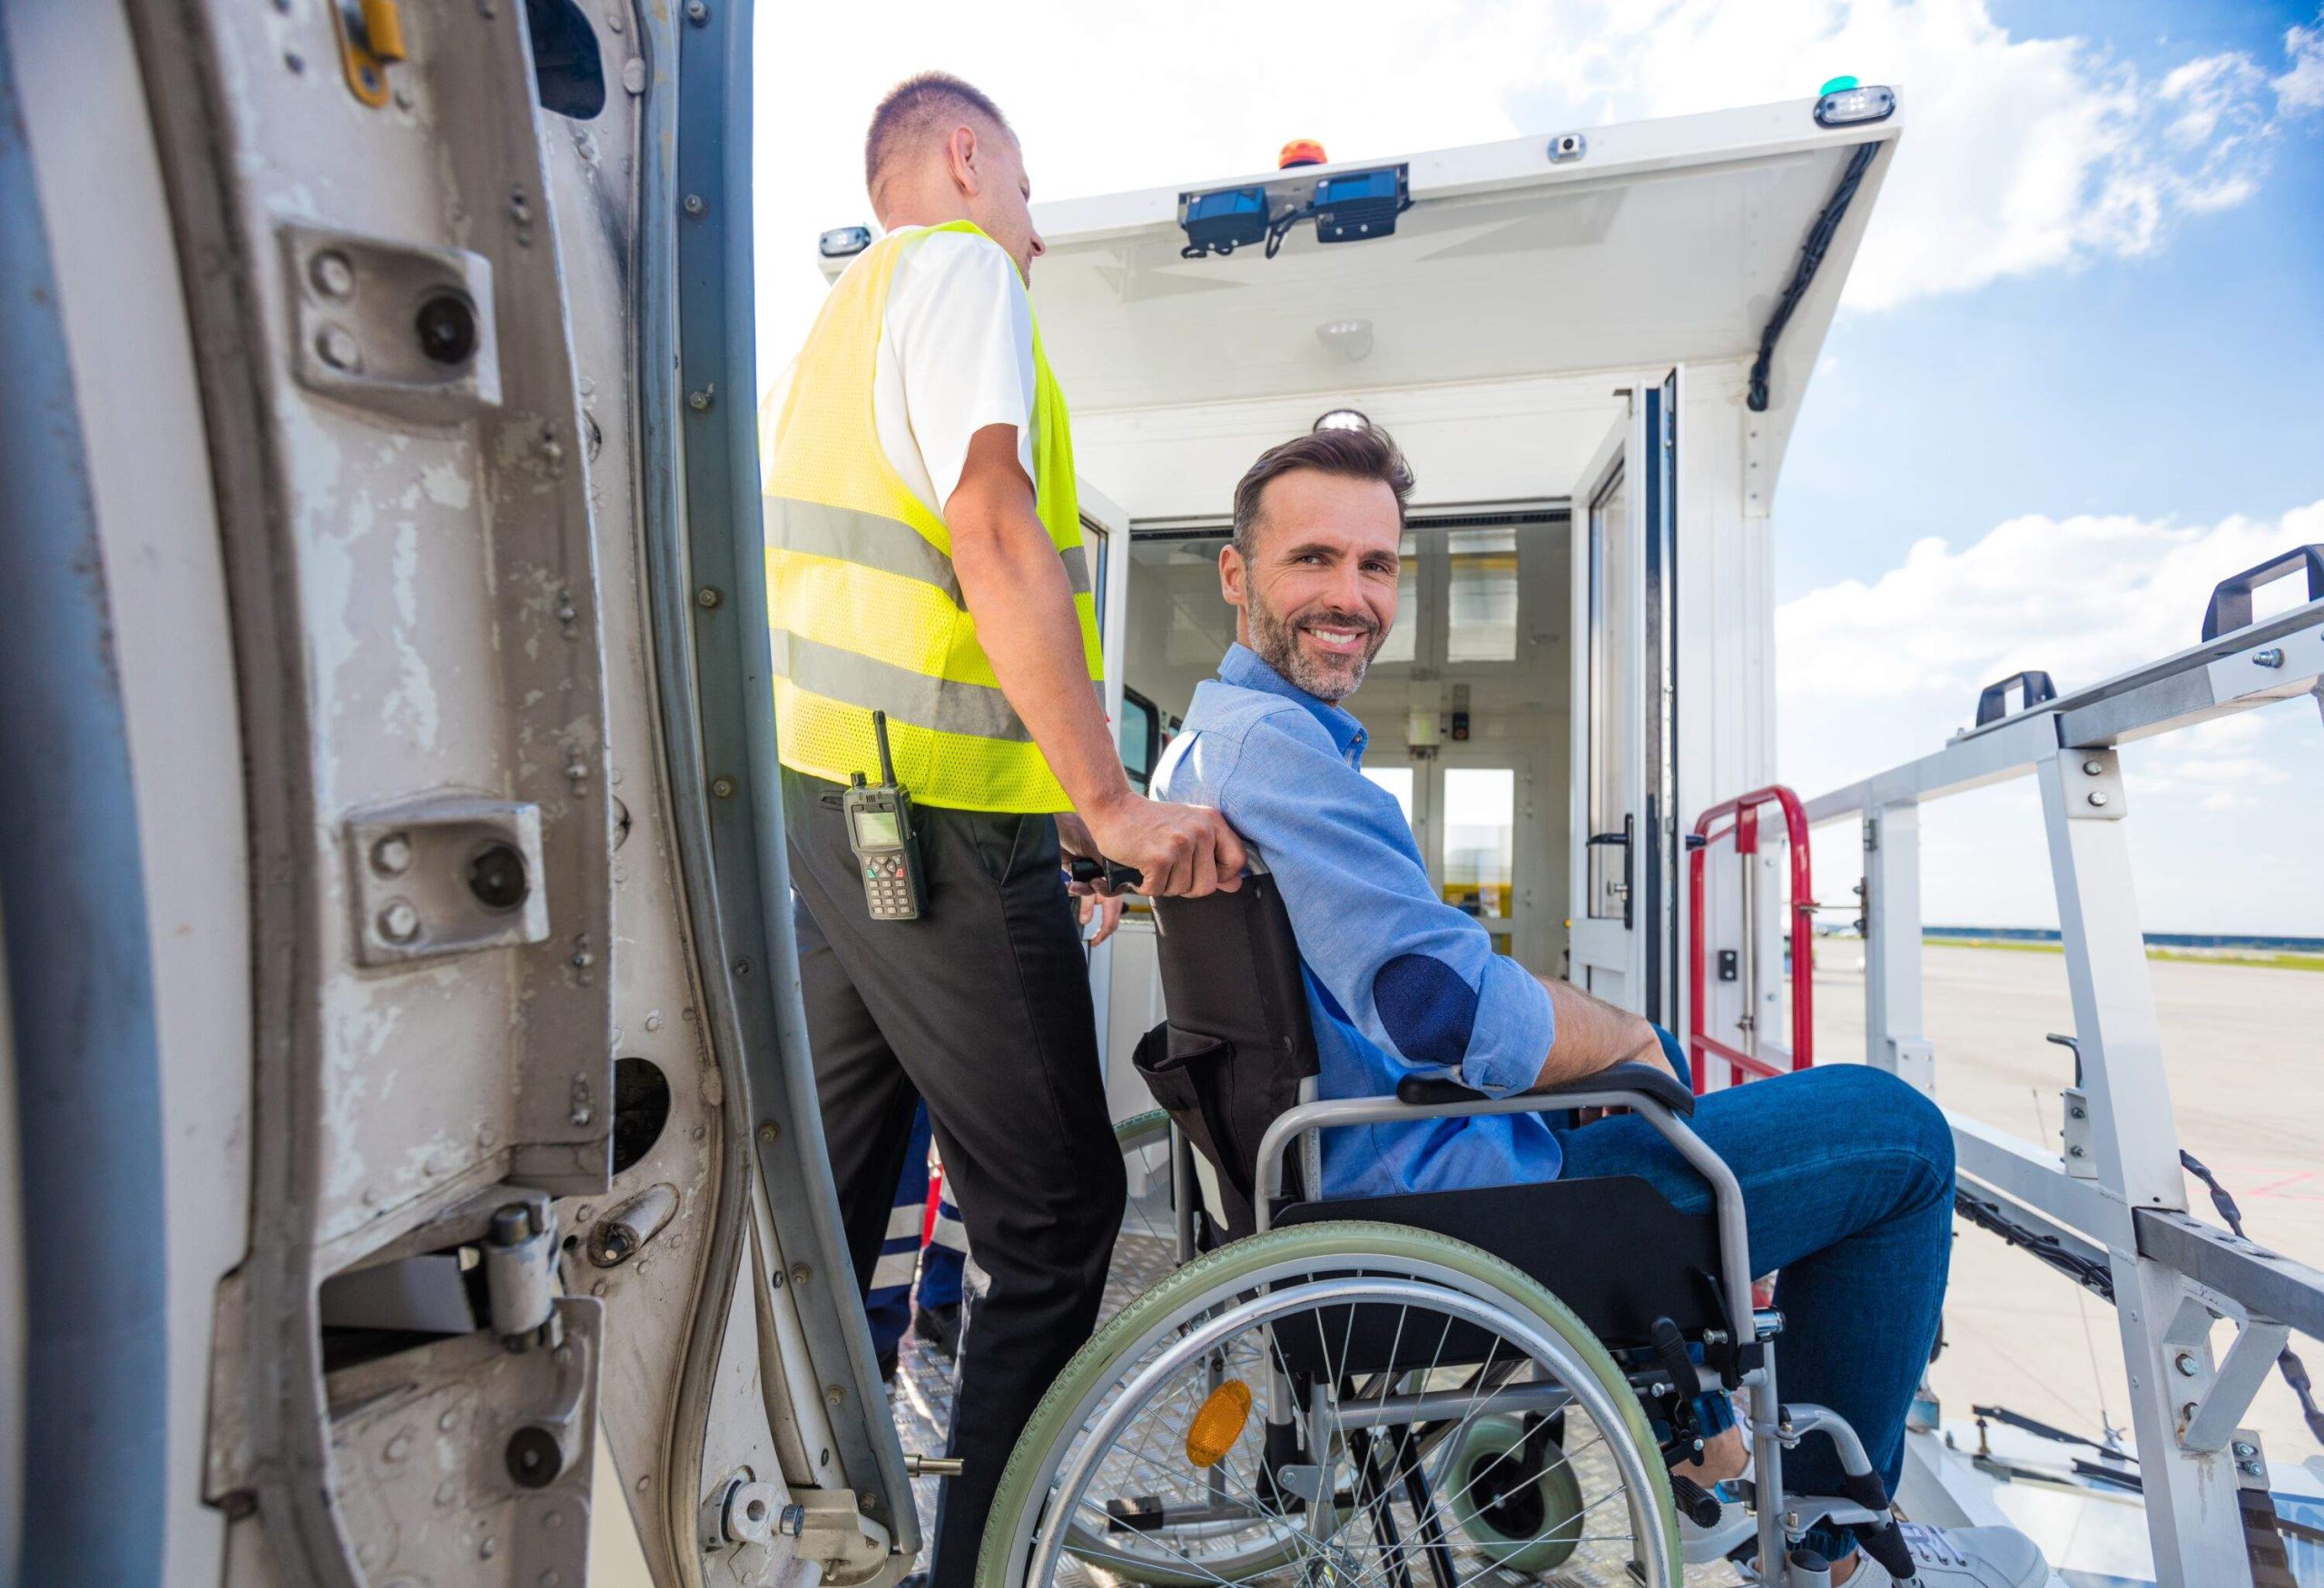 Ground service men helping wheelchair passenger to enter on airplane board, they using an elevator. Disabled man smiling at camera.